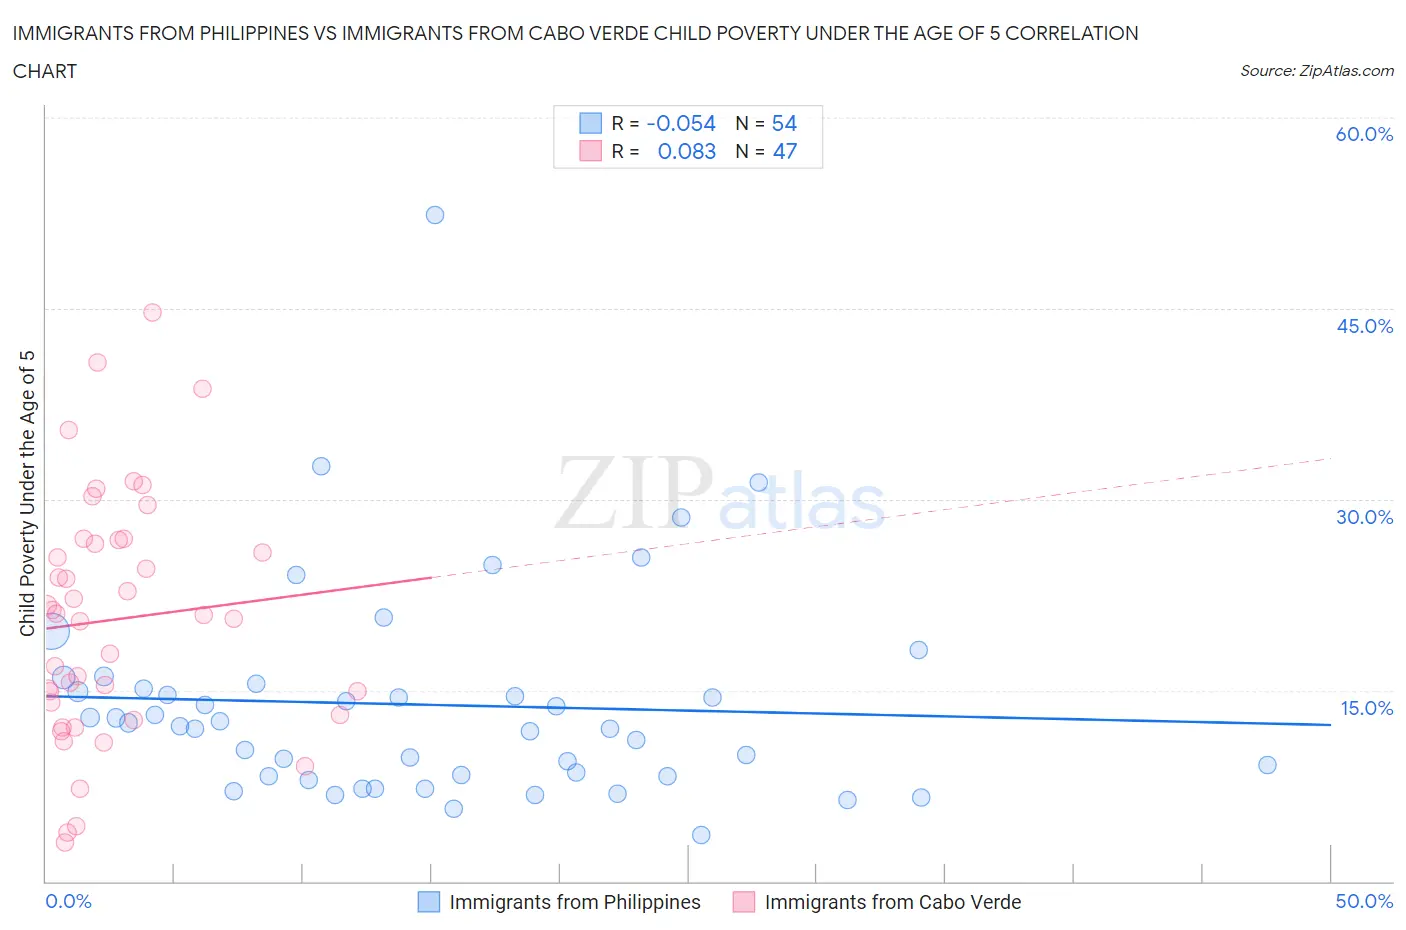 Immigrants from Philippines vs Immigrants from Cabo Verde Child Poverty Under the Age of 5